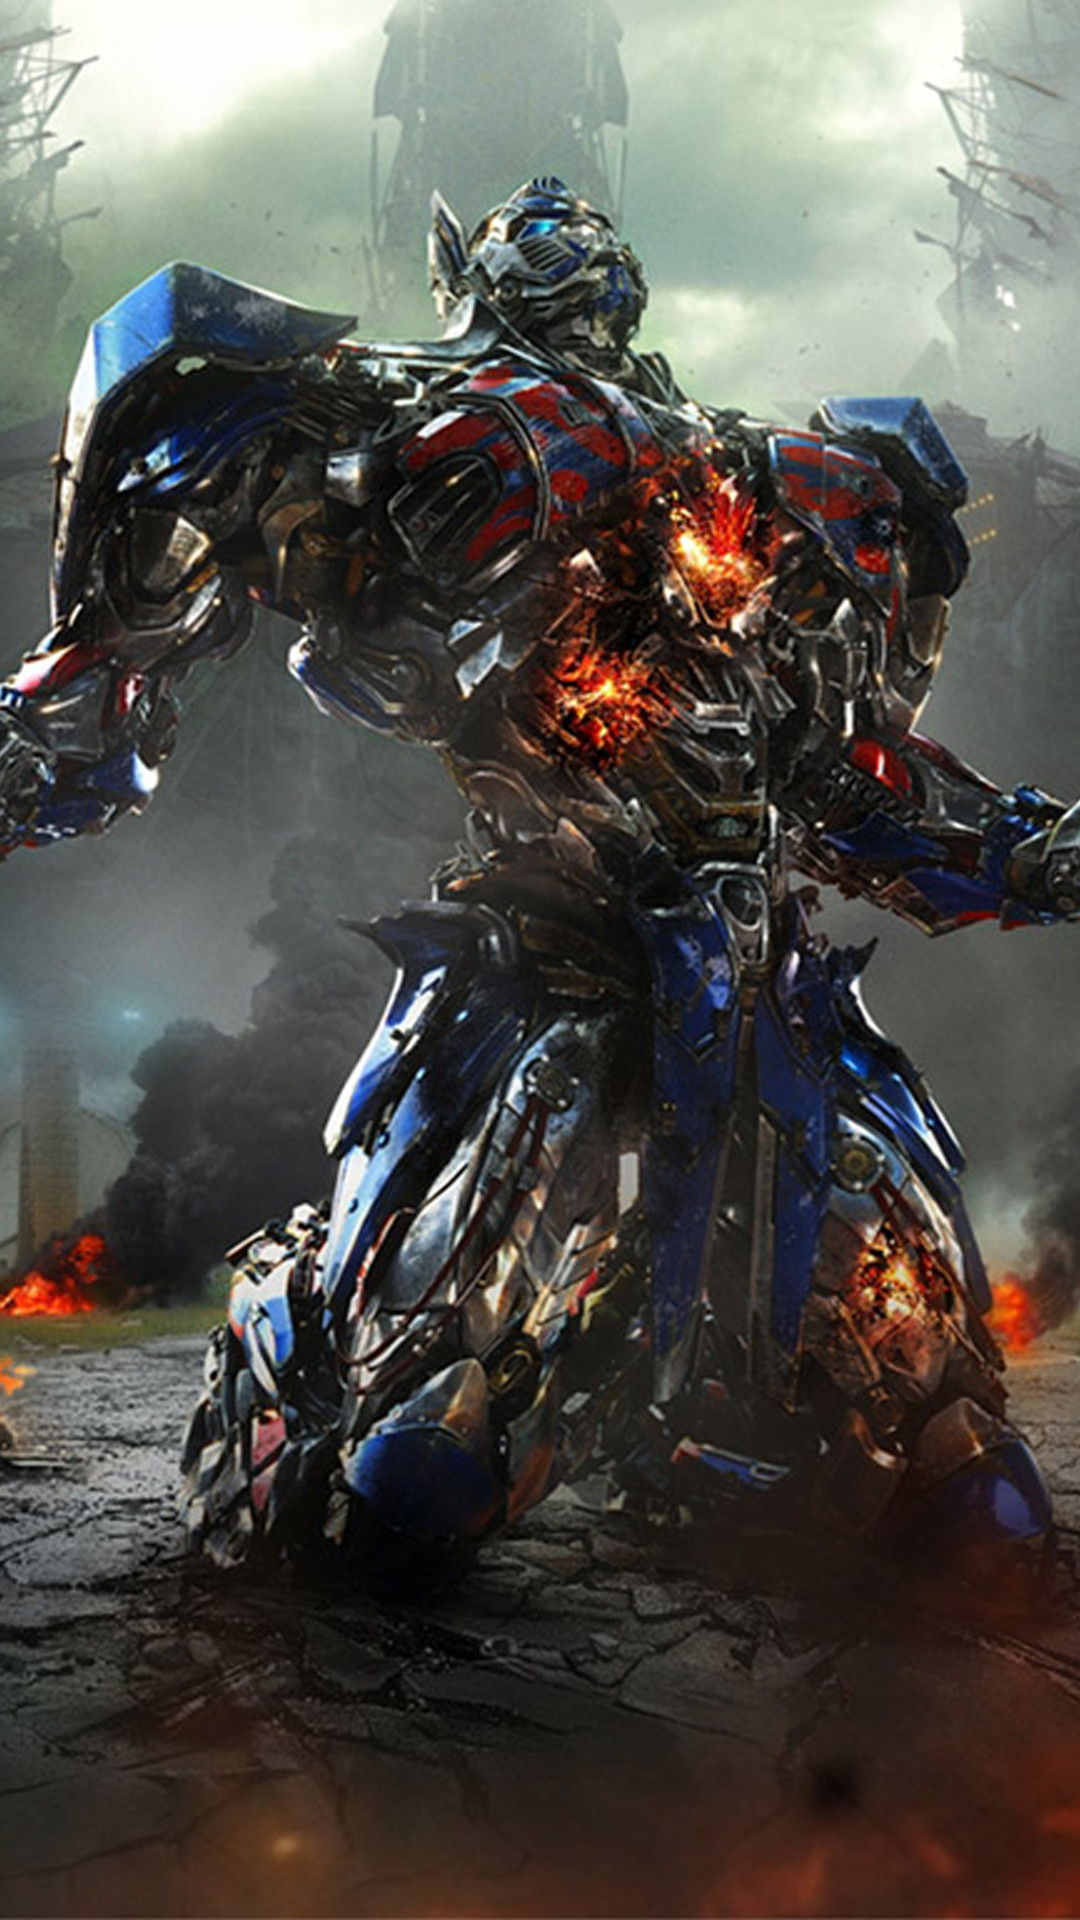 optimus prime wallpaper hd for android apk download on optimus prime hd wallpapers